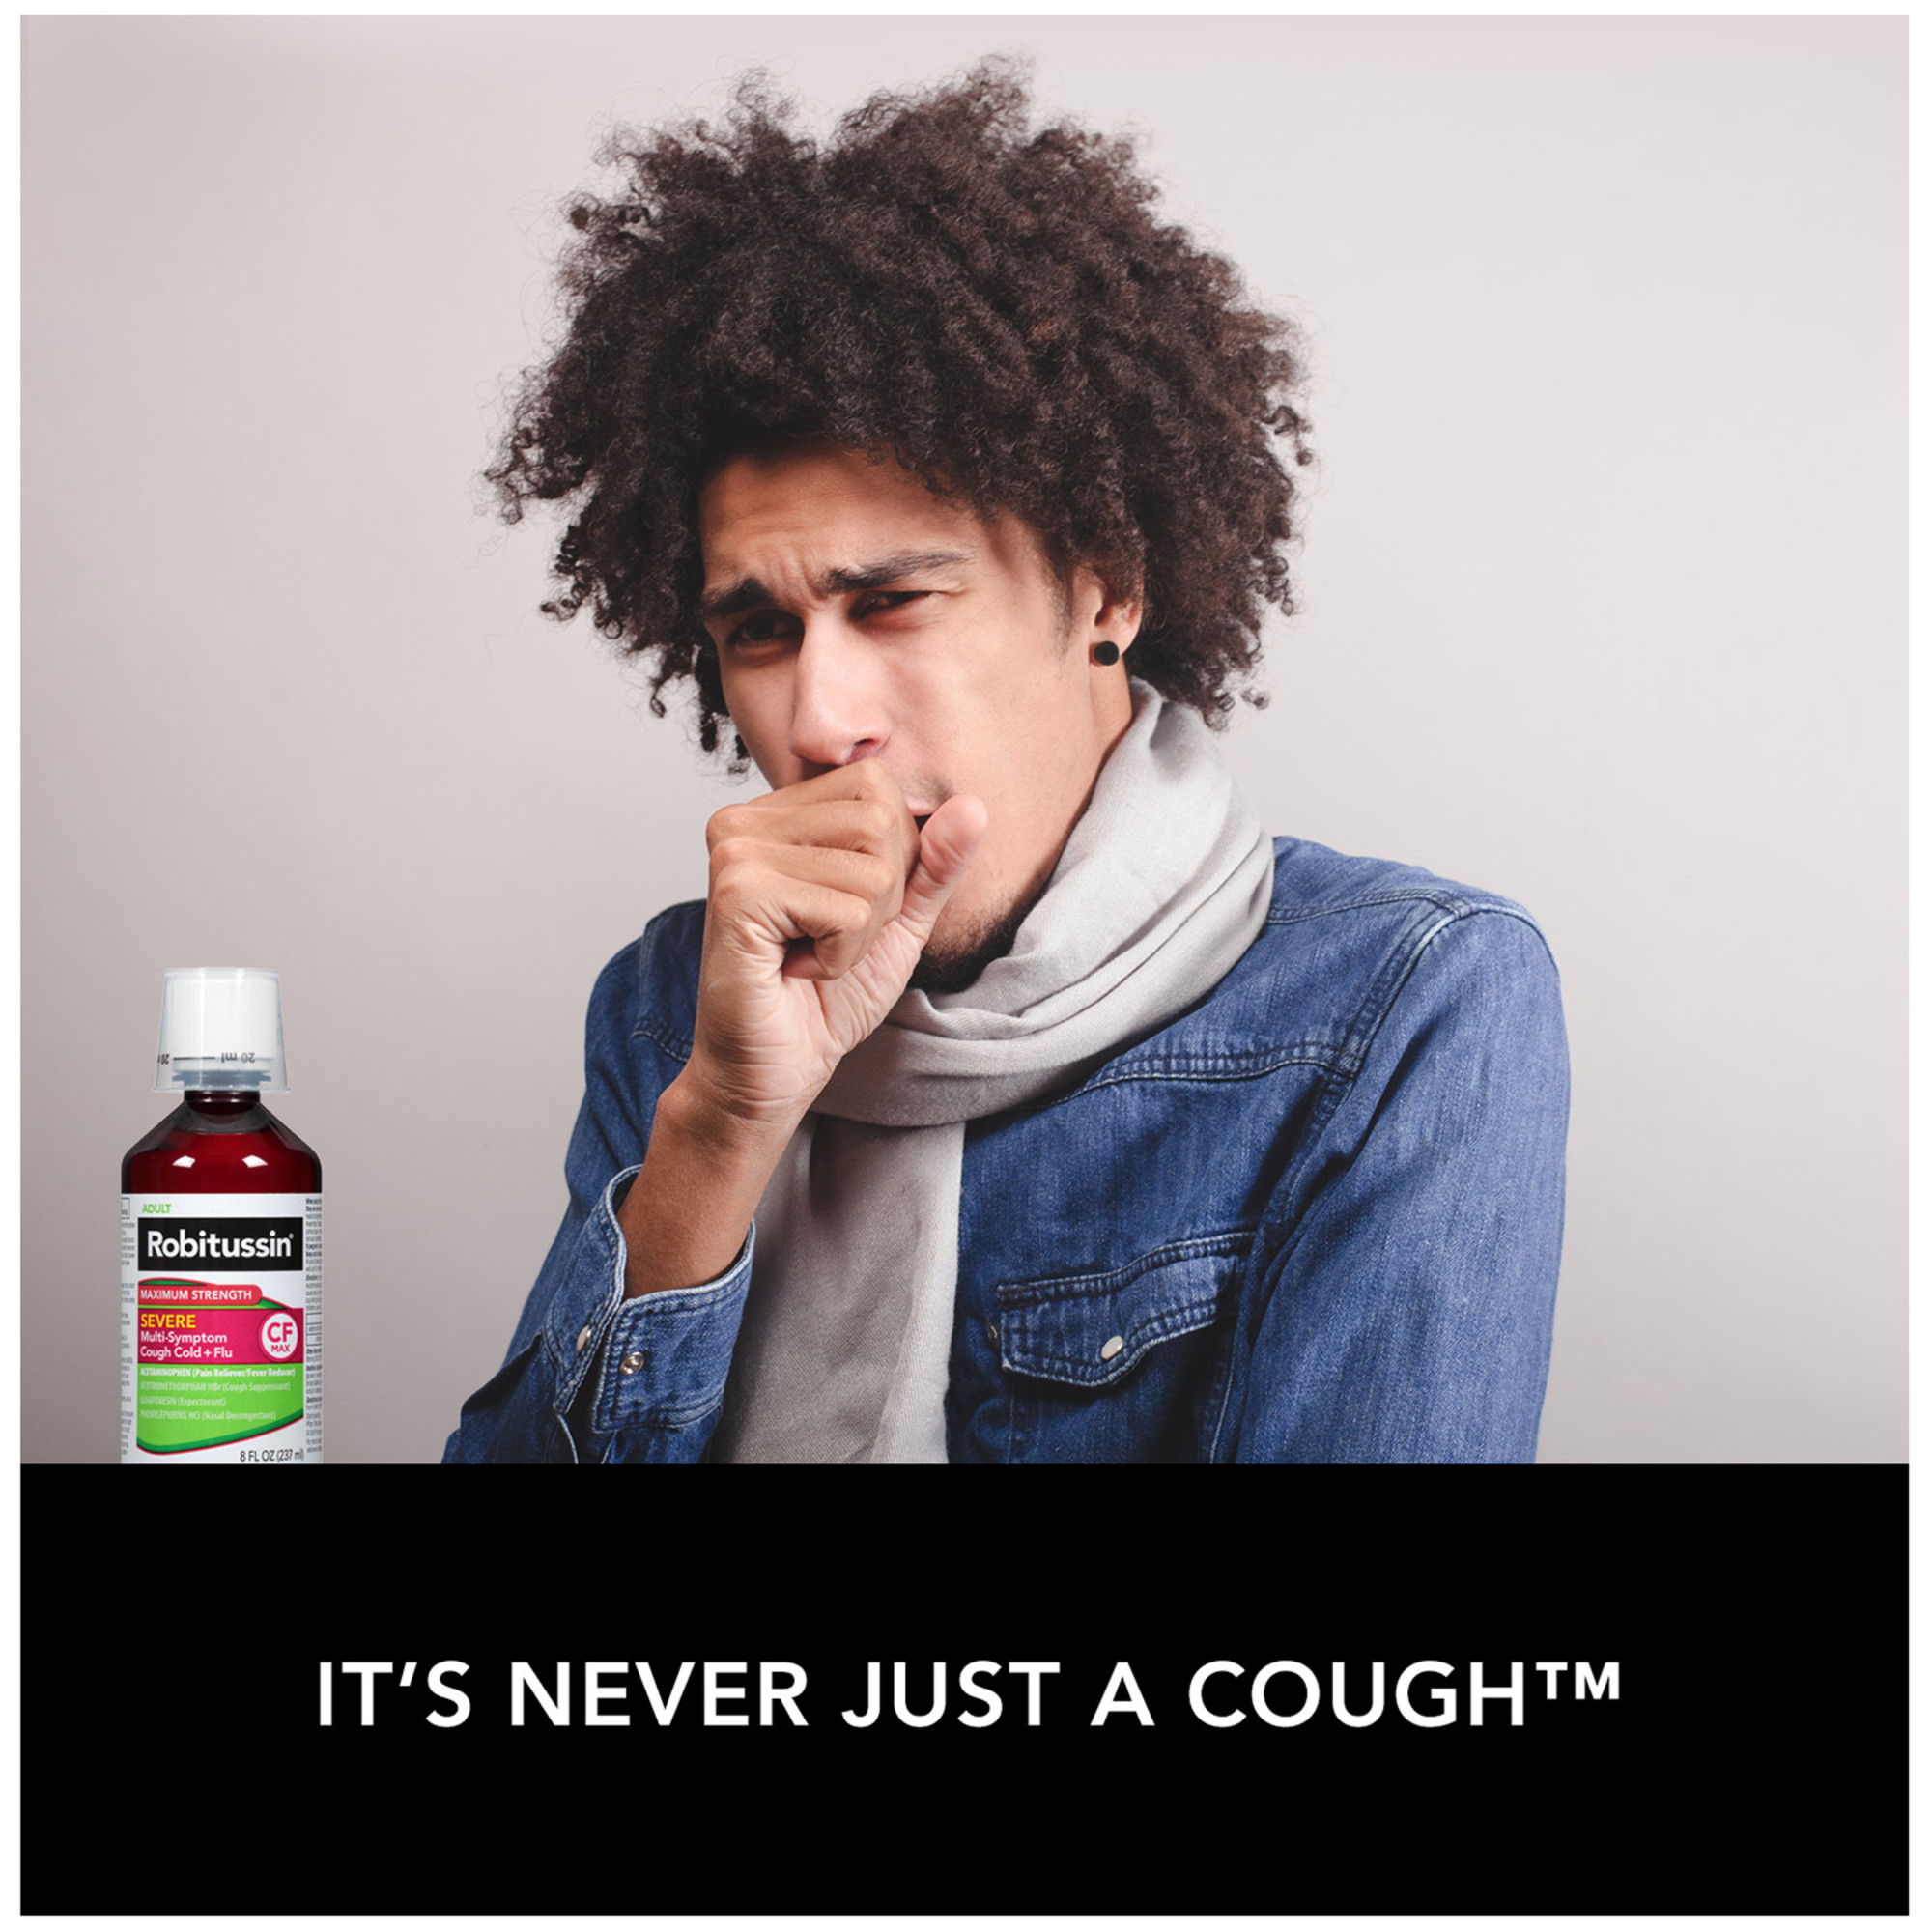 Robitussin CF Max Syrup, Severe Multi-Symptom Relief from Cough, Cold, and Flu - Adult Formula, 4 fl oz. - image 4 of 10